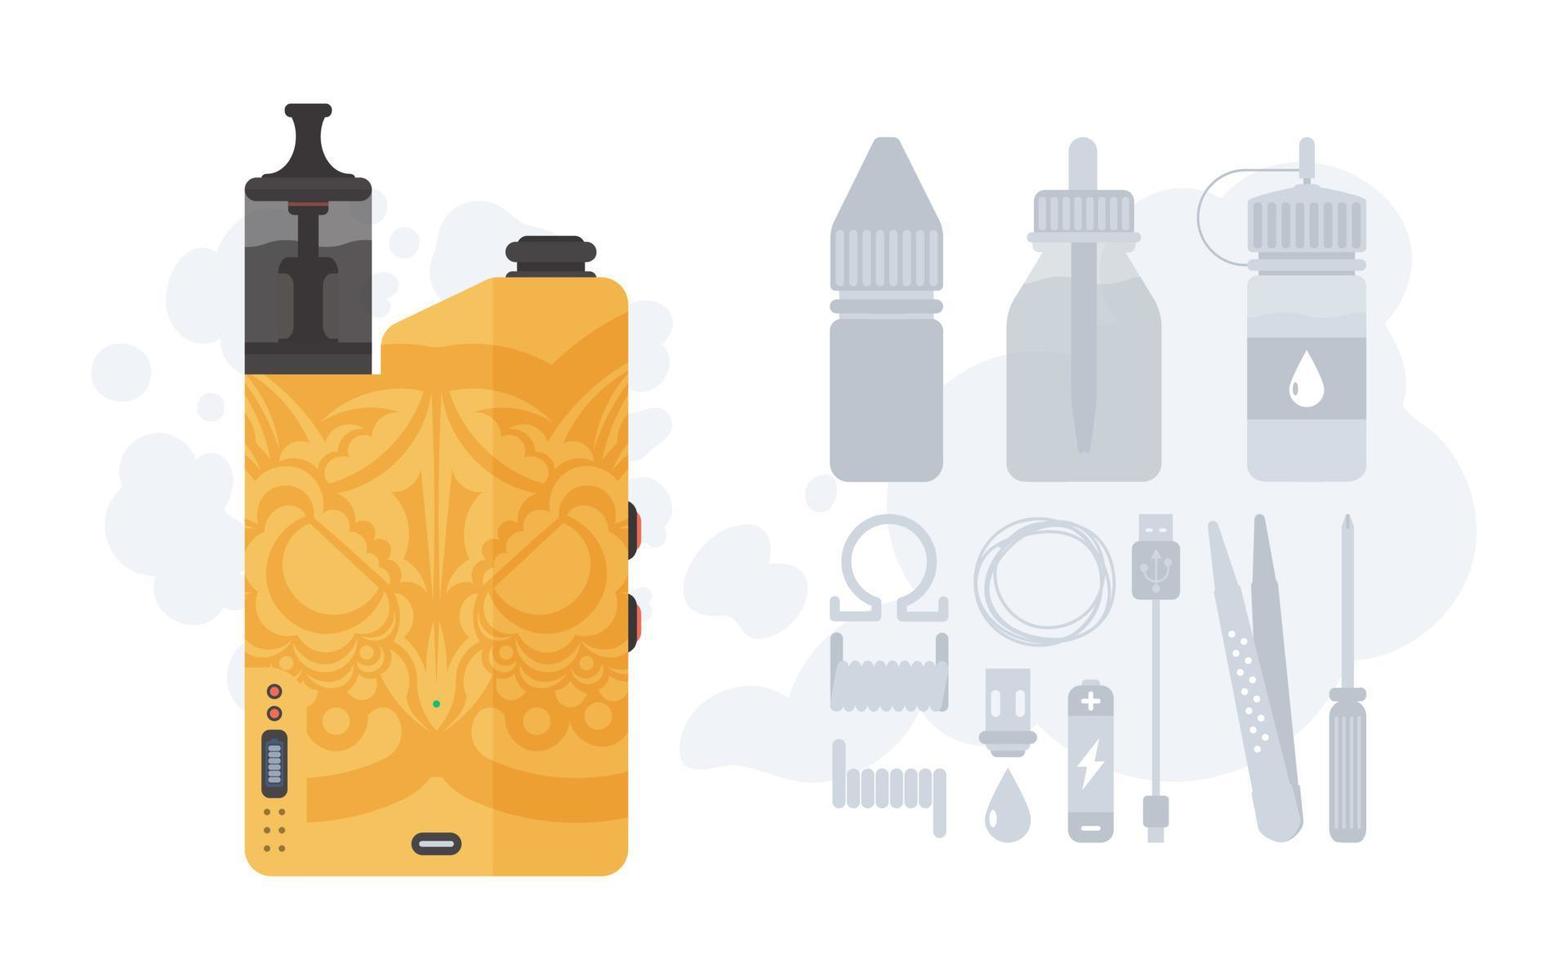 Vape or vapor illustration. Cigarette substitute. Smoking tool. Includes component icons. Flat style design vector